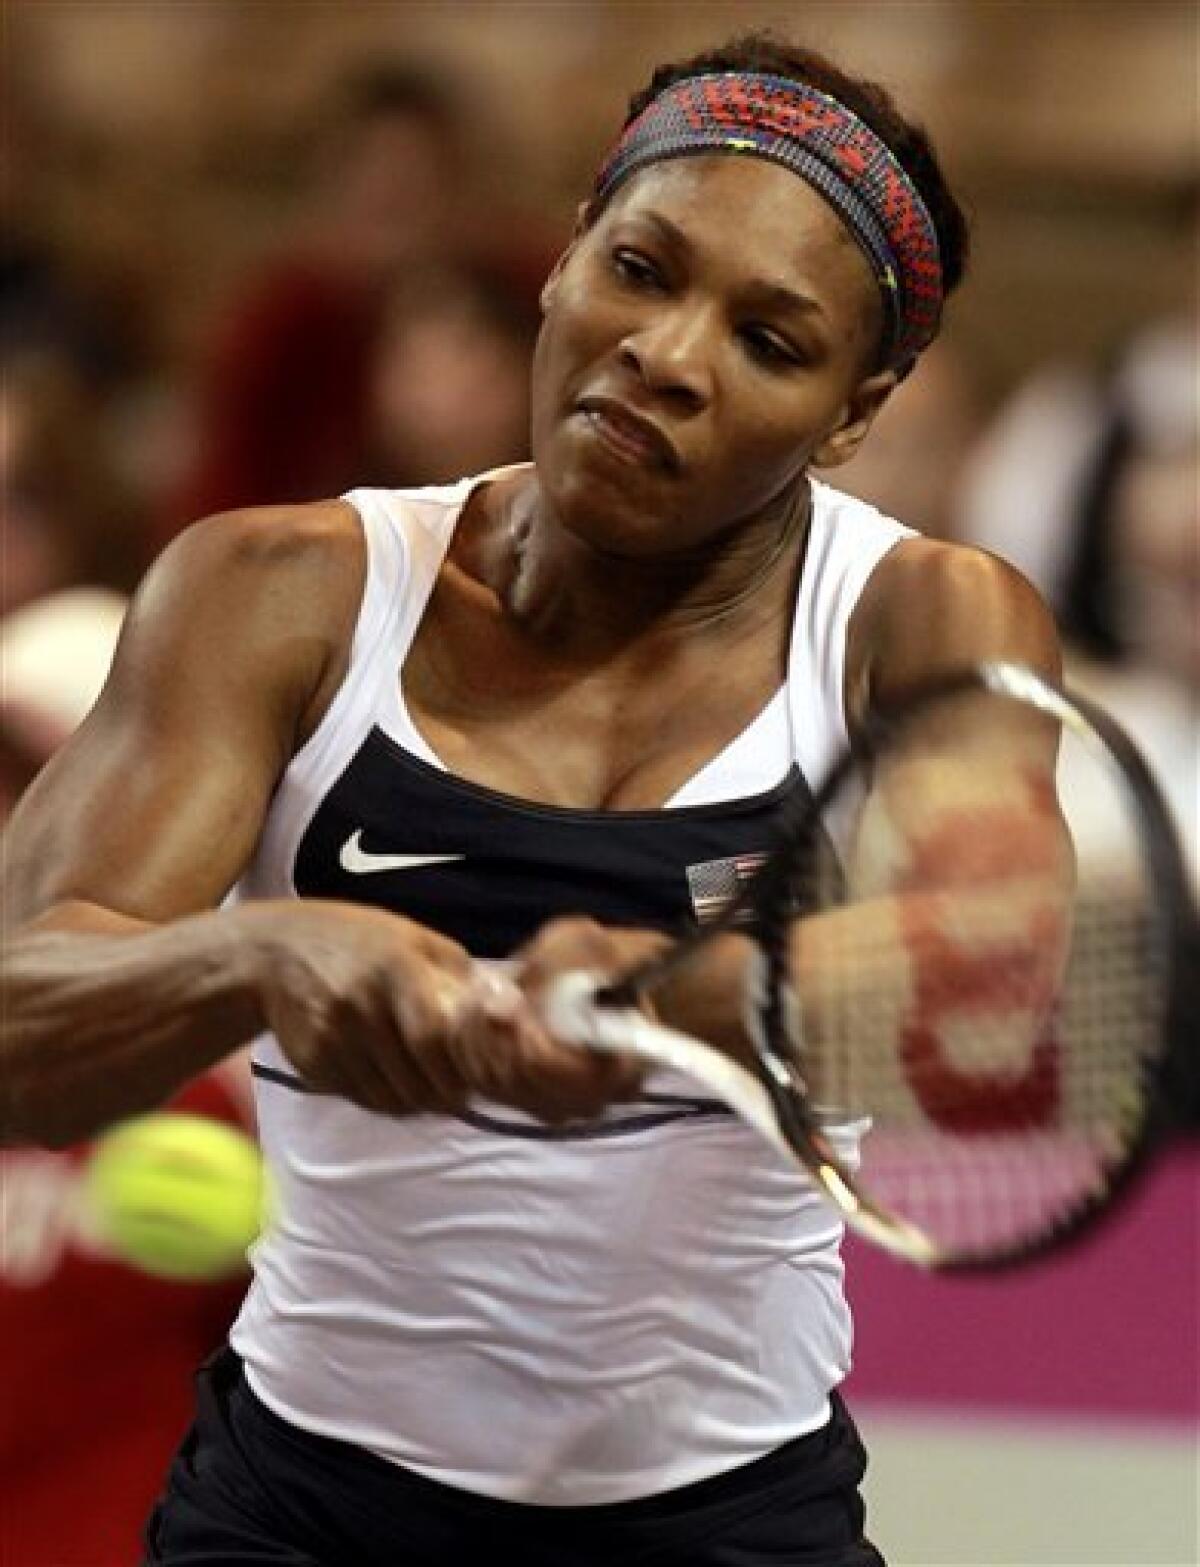 Serena Williams returns a ball to Anastasia Yakimova, of Belarus, during a first-round Fed Cup tennis match in Worcester, Mass., Sunday, Feb. 5, 2012. (AP Photo/Steven Senne)